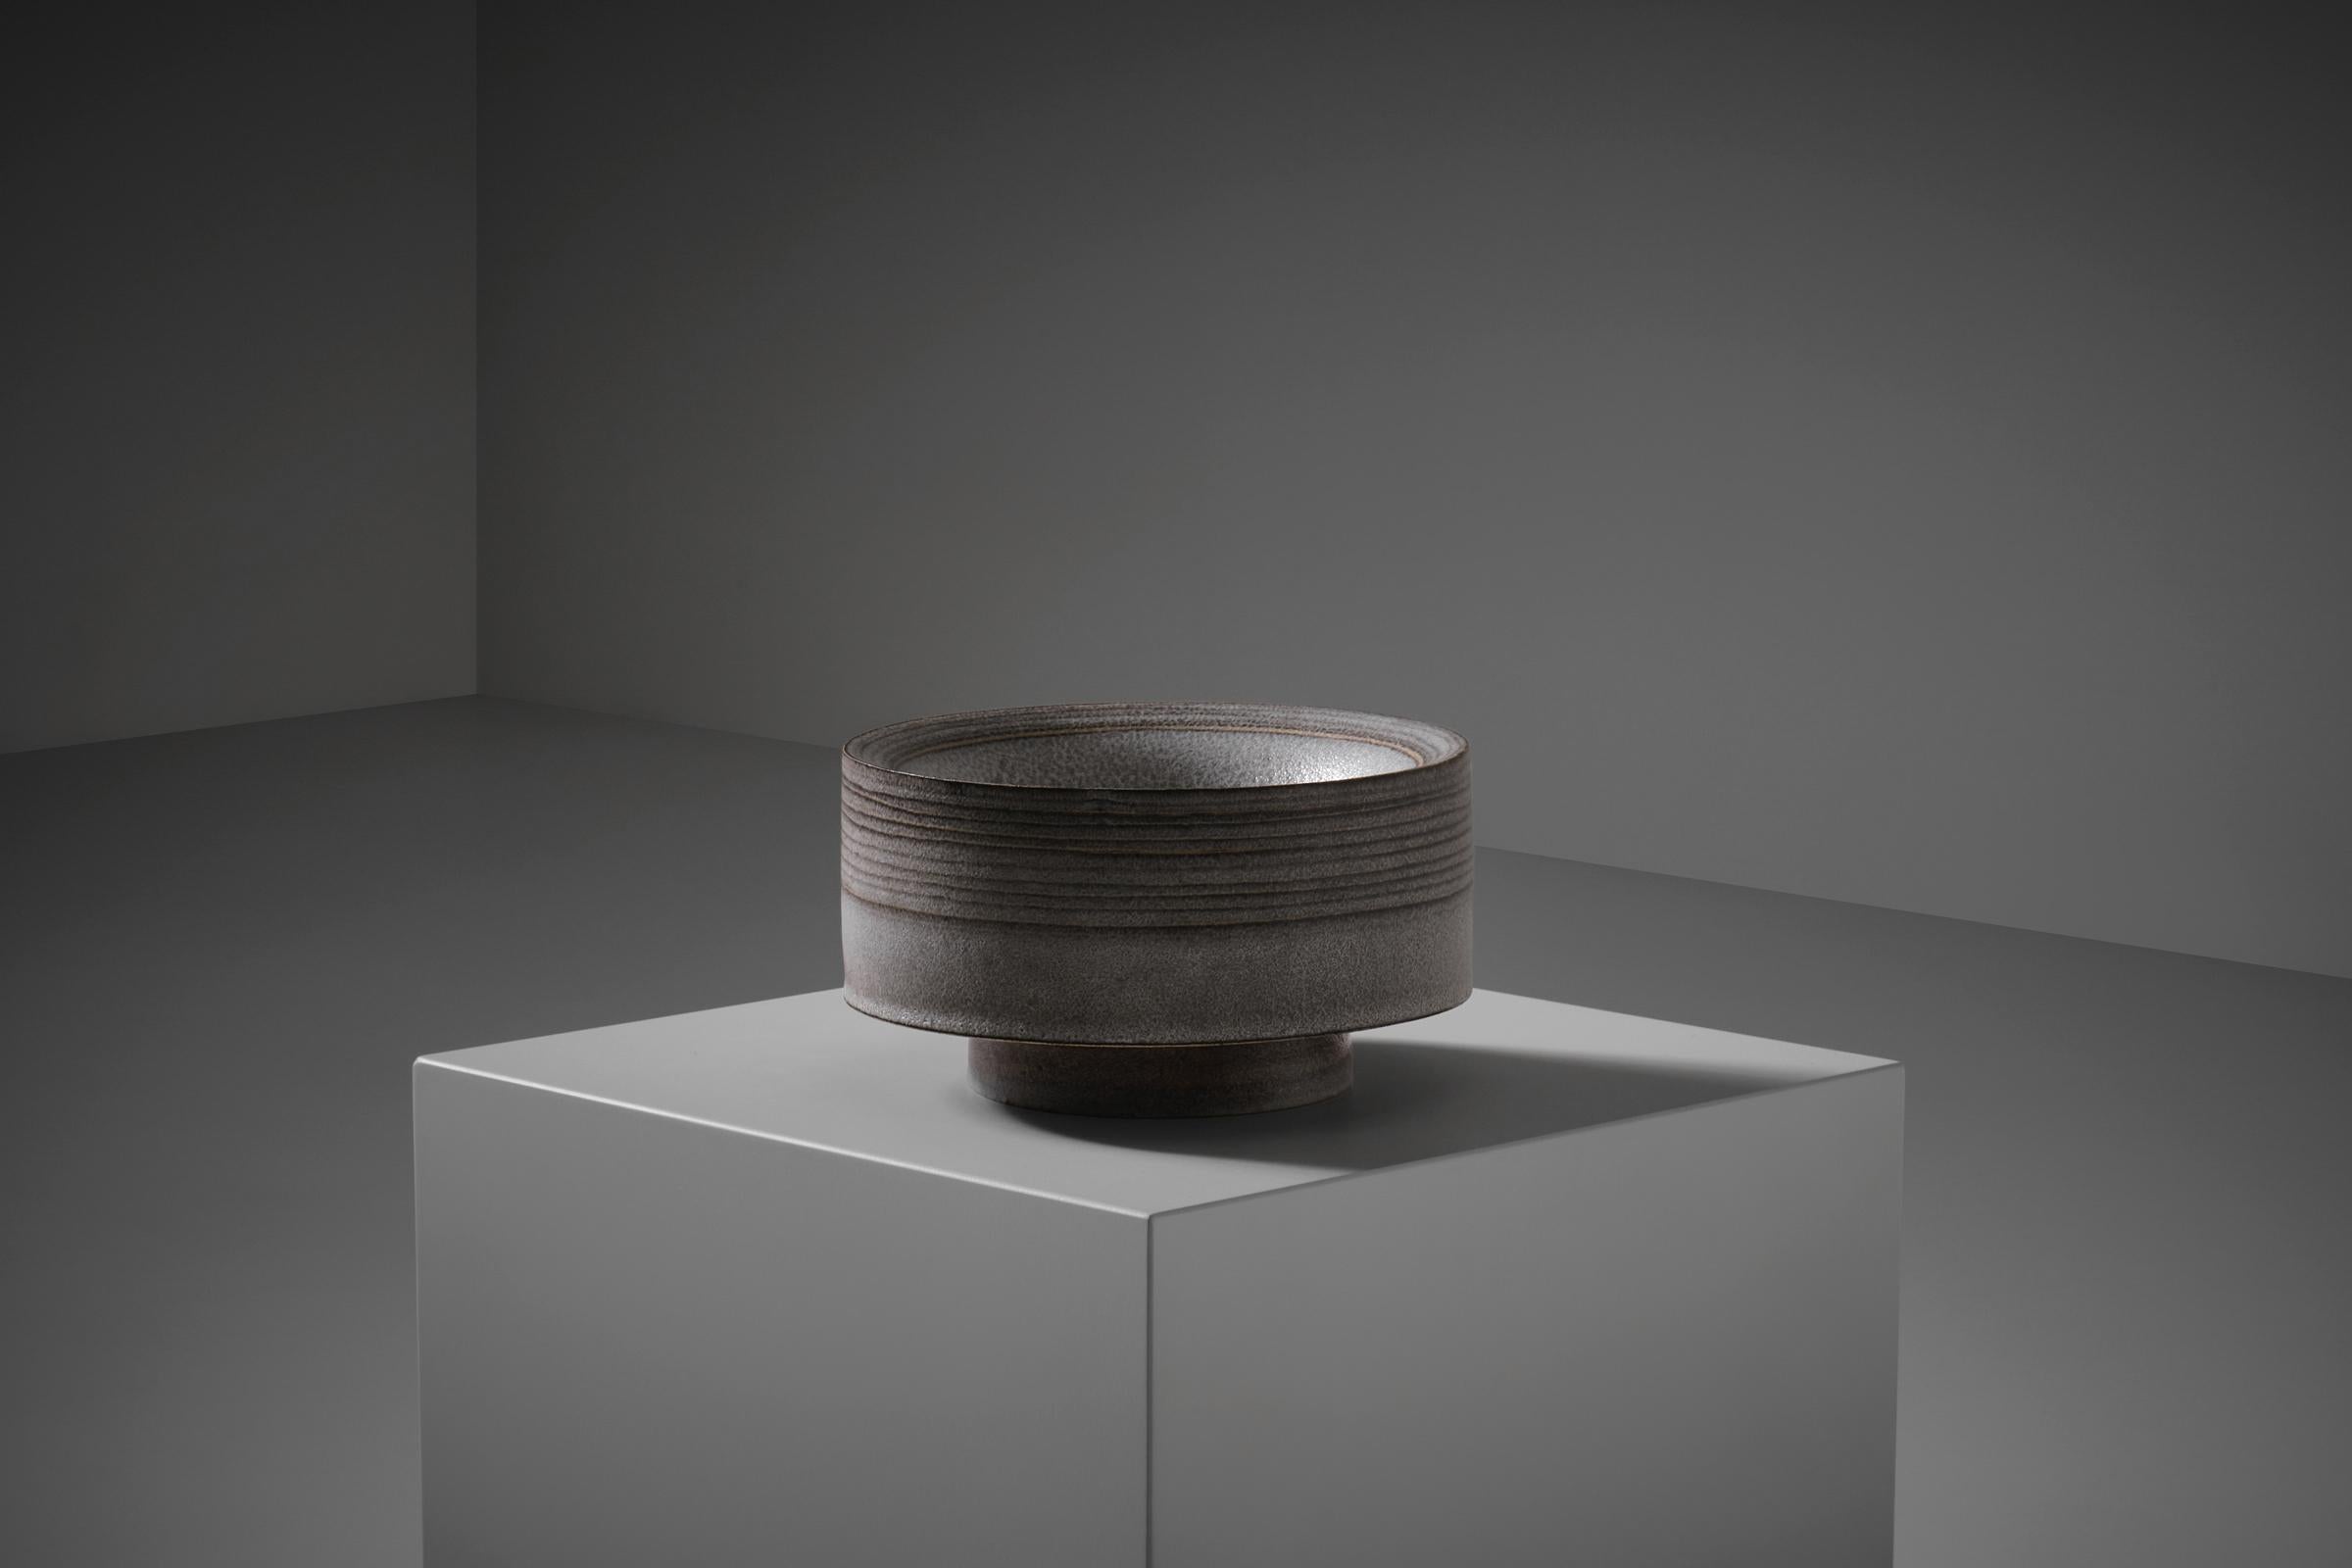 Ceramic bowl by Carlo Zauli, Italy, 1960s. Beautiful strong shape in a nice neutral grey brownish ceramic with a refined yet minimal line decoration in dark brown. The lines create a nice contrast with the lighter surface and points out the circular